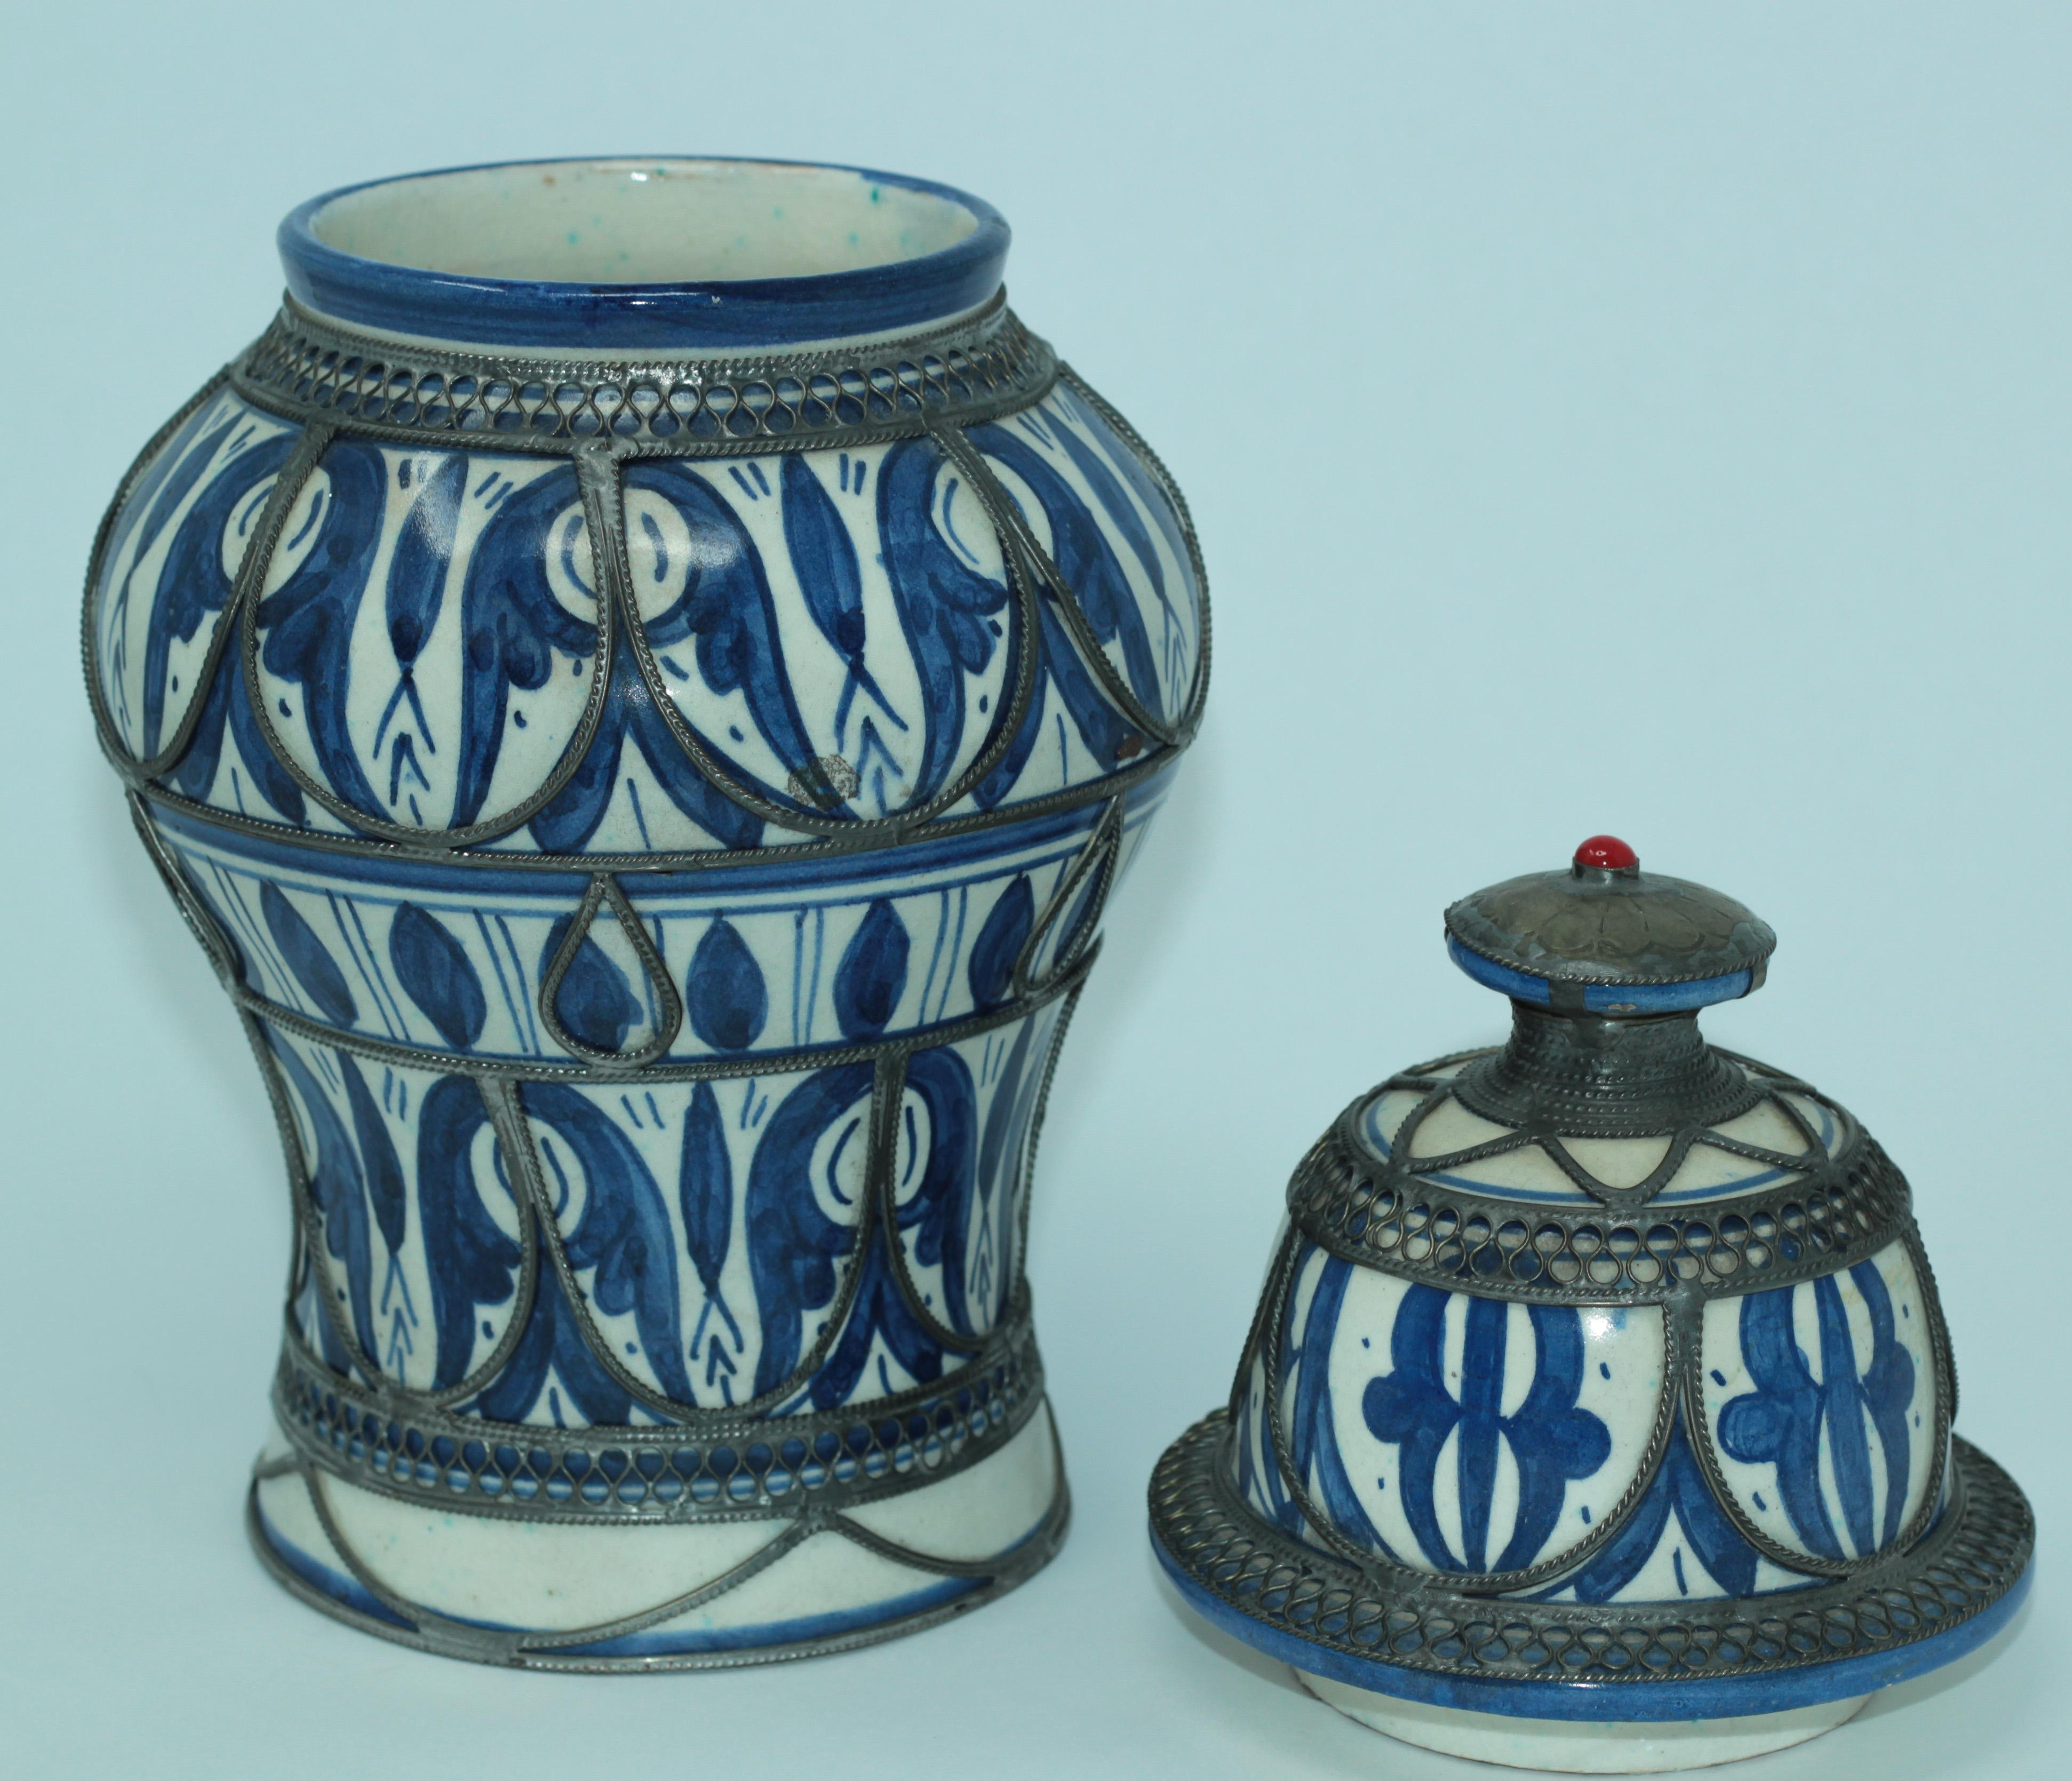 Moroccan Ceramic Vase from Fez Blue and White with Silver Filigree For Sale 2